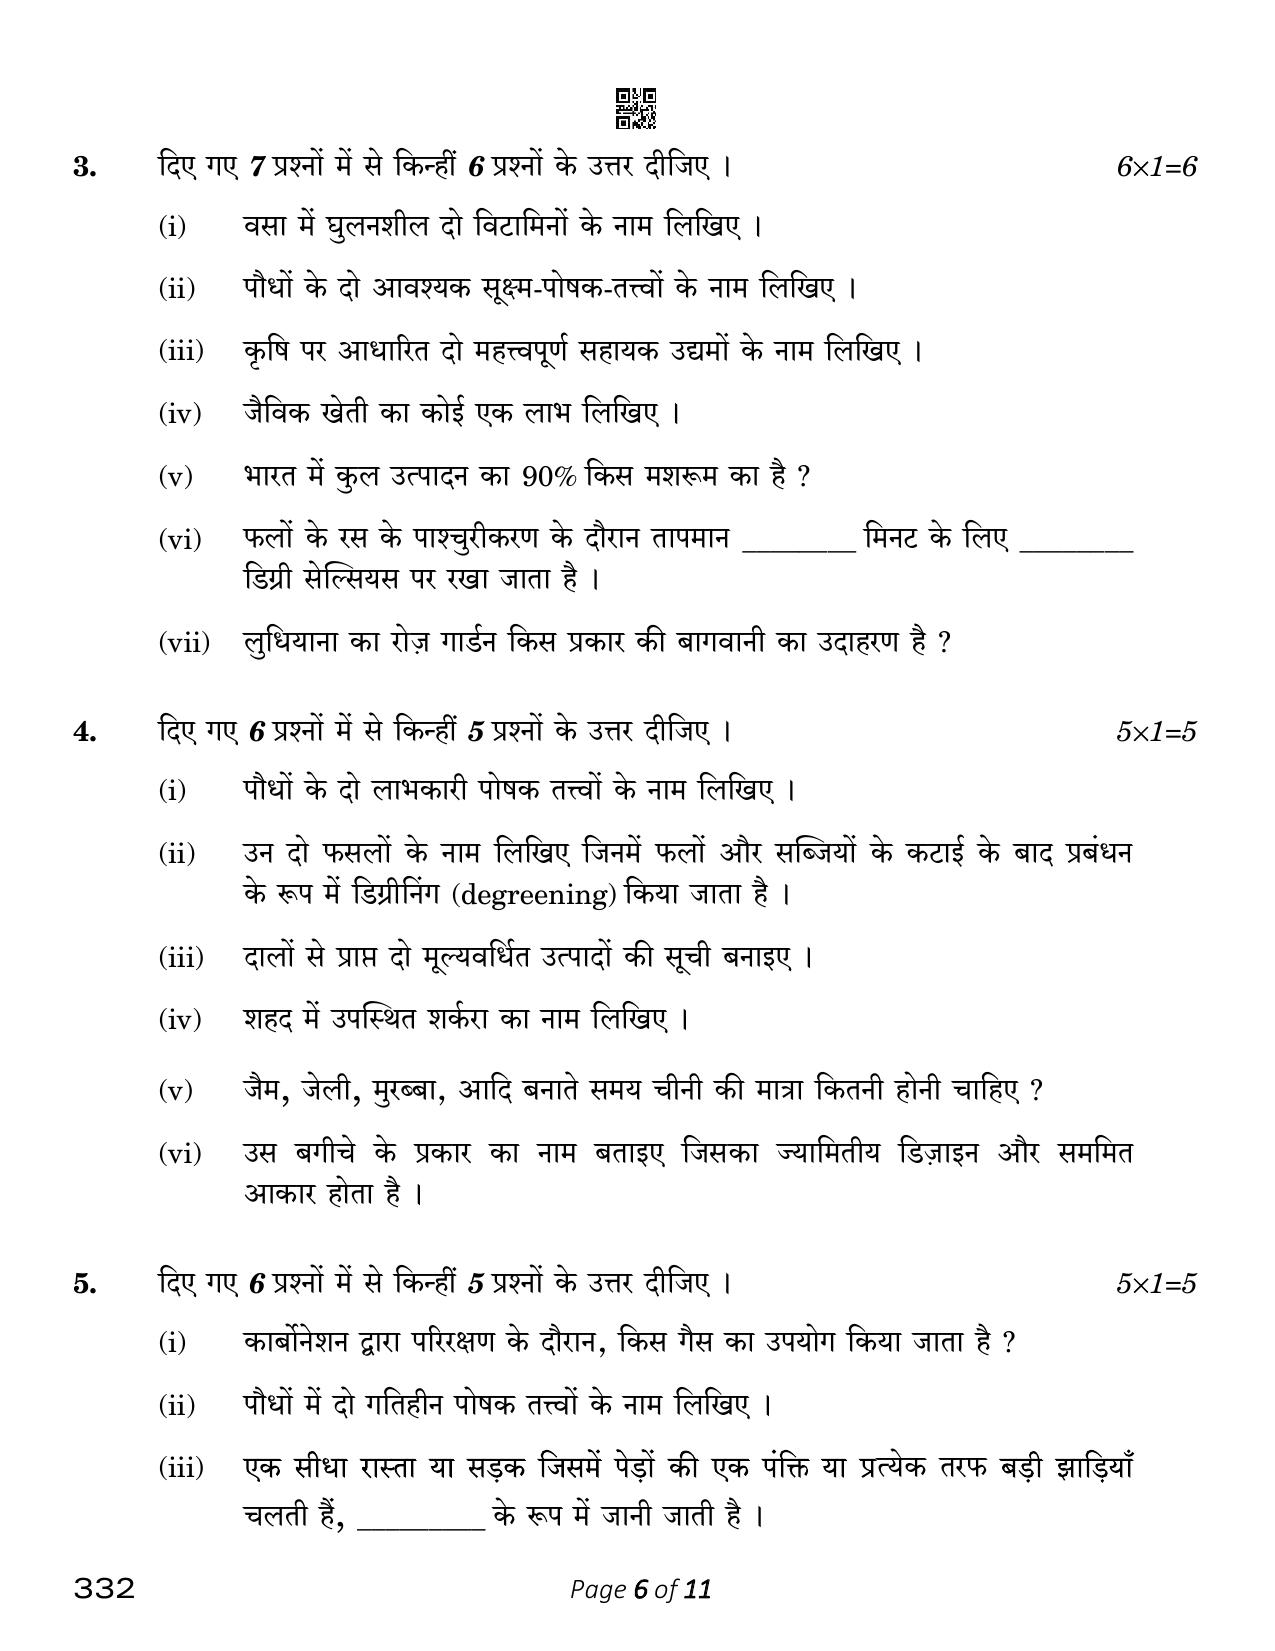 CBSE Class 12 Agriculture (Compartment) 2023 Question Paper - Page 6